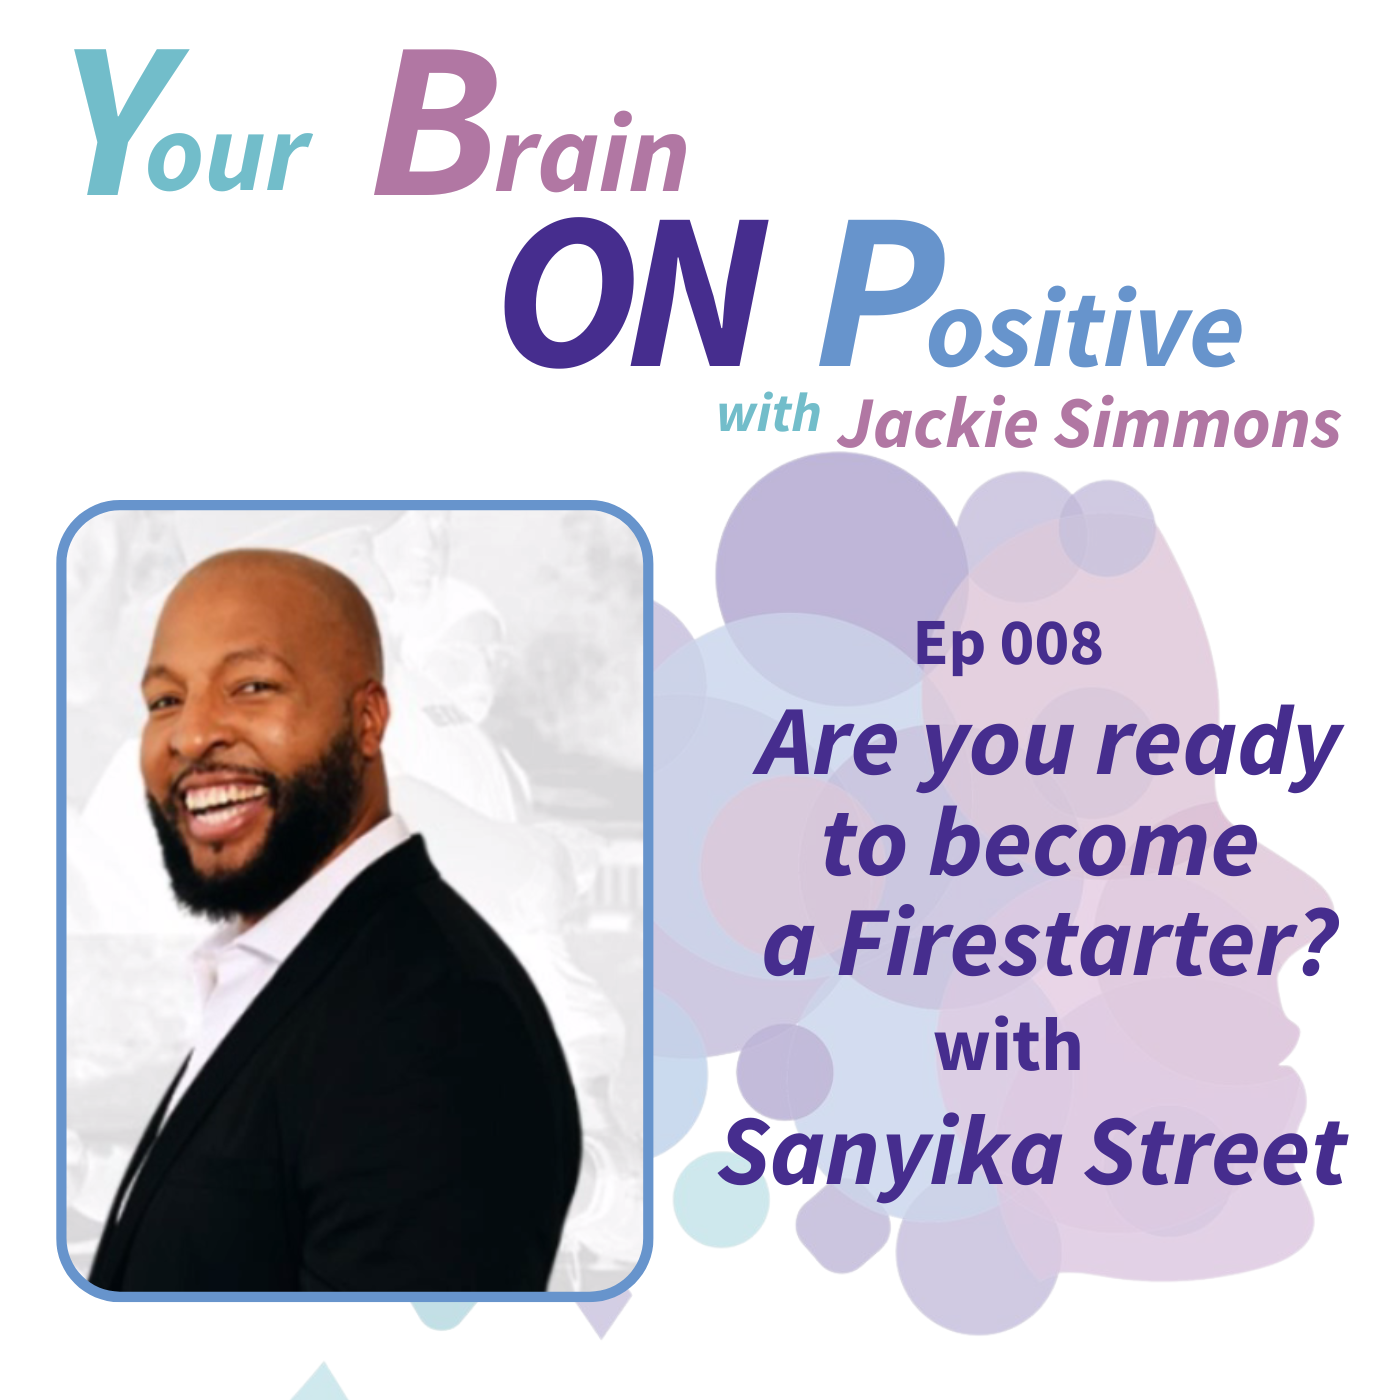 Are you ready to become a Firestarter? - Sanyika Street